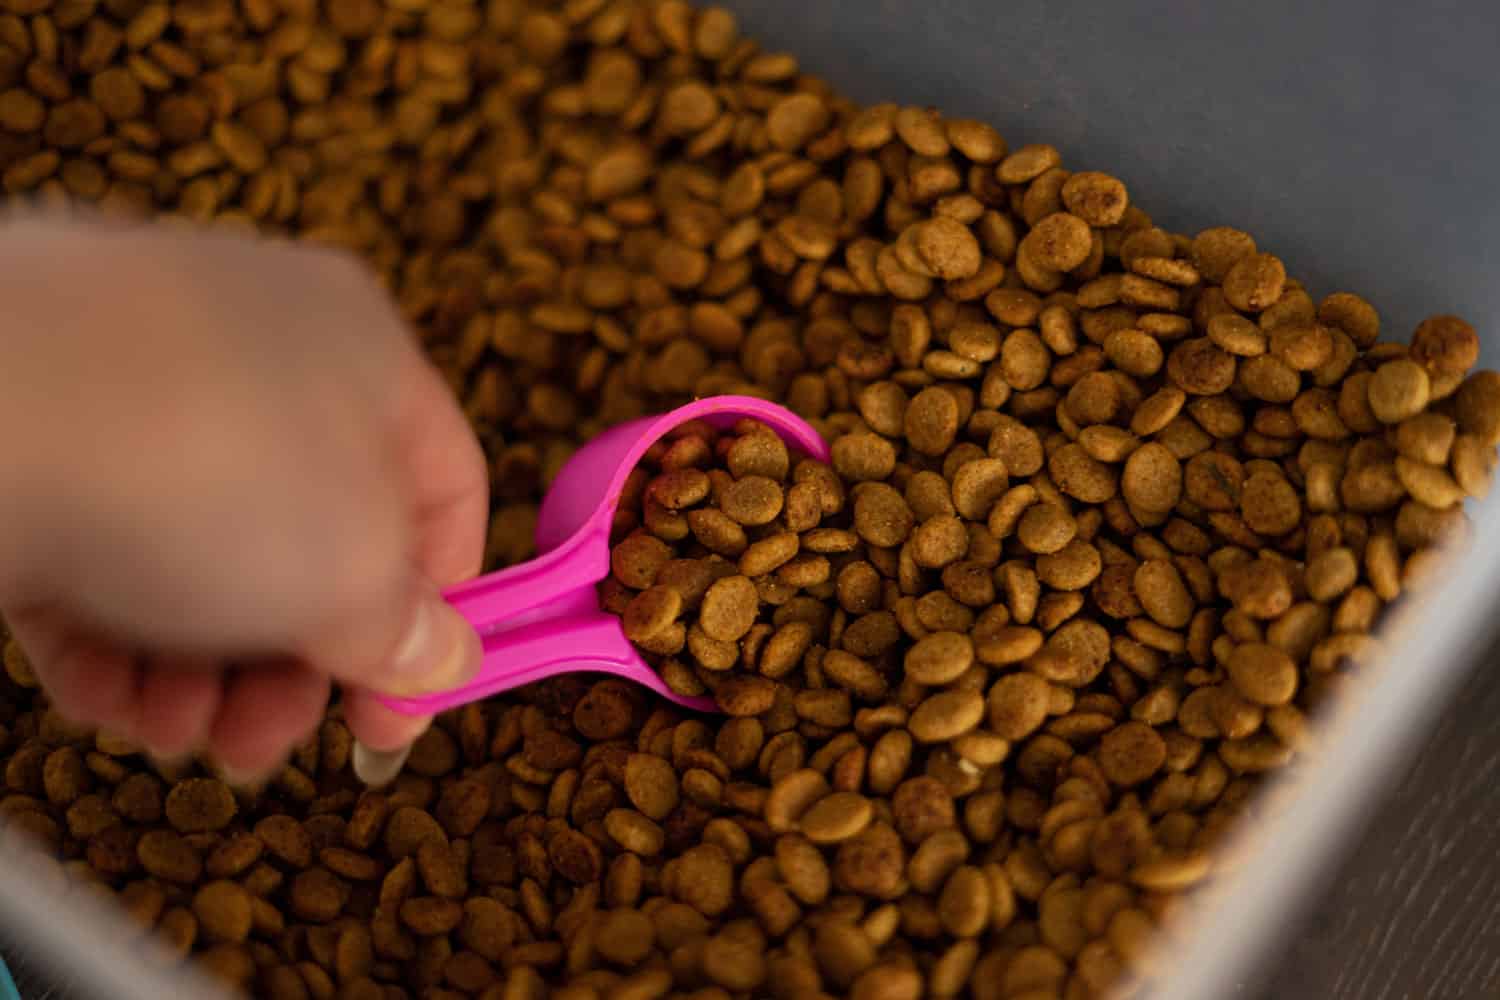 White female hand scooping up a portion of brown dog food kibble with a small bright pink measuring cup spoon from a plastic container to feed pet toy poodles
